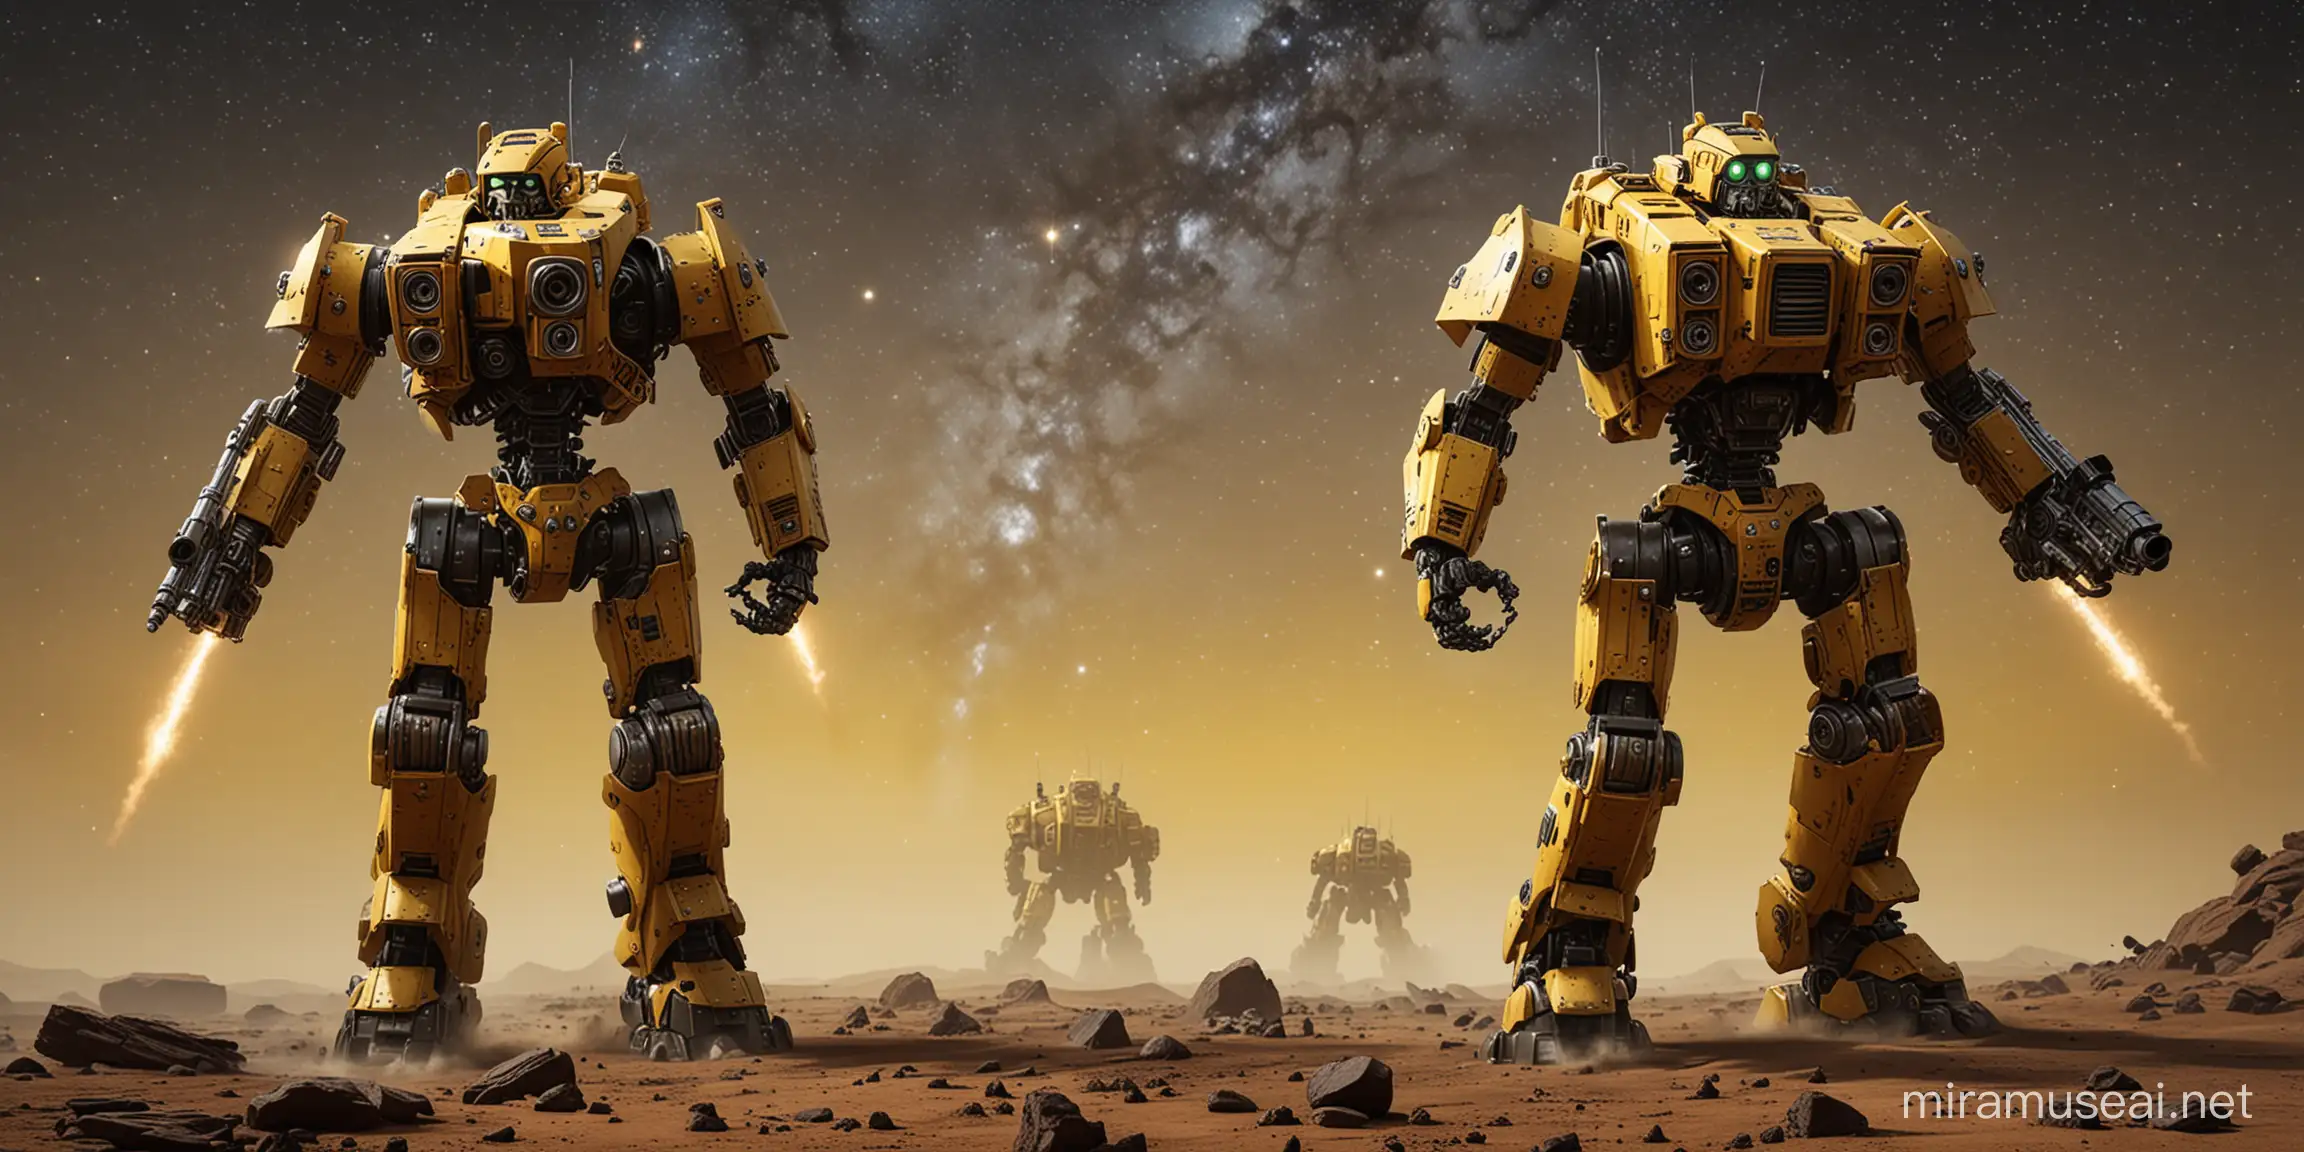 Heavy Armored Bipedal Robots Advance in Warhammer 40k Style